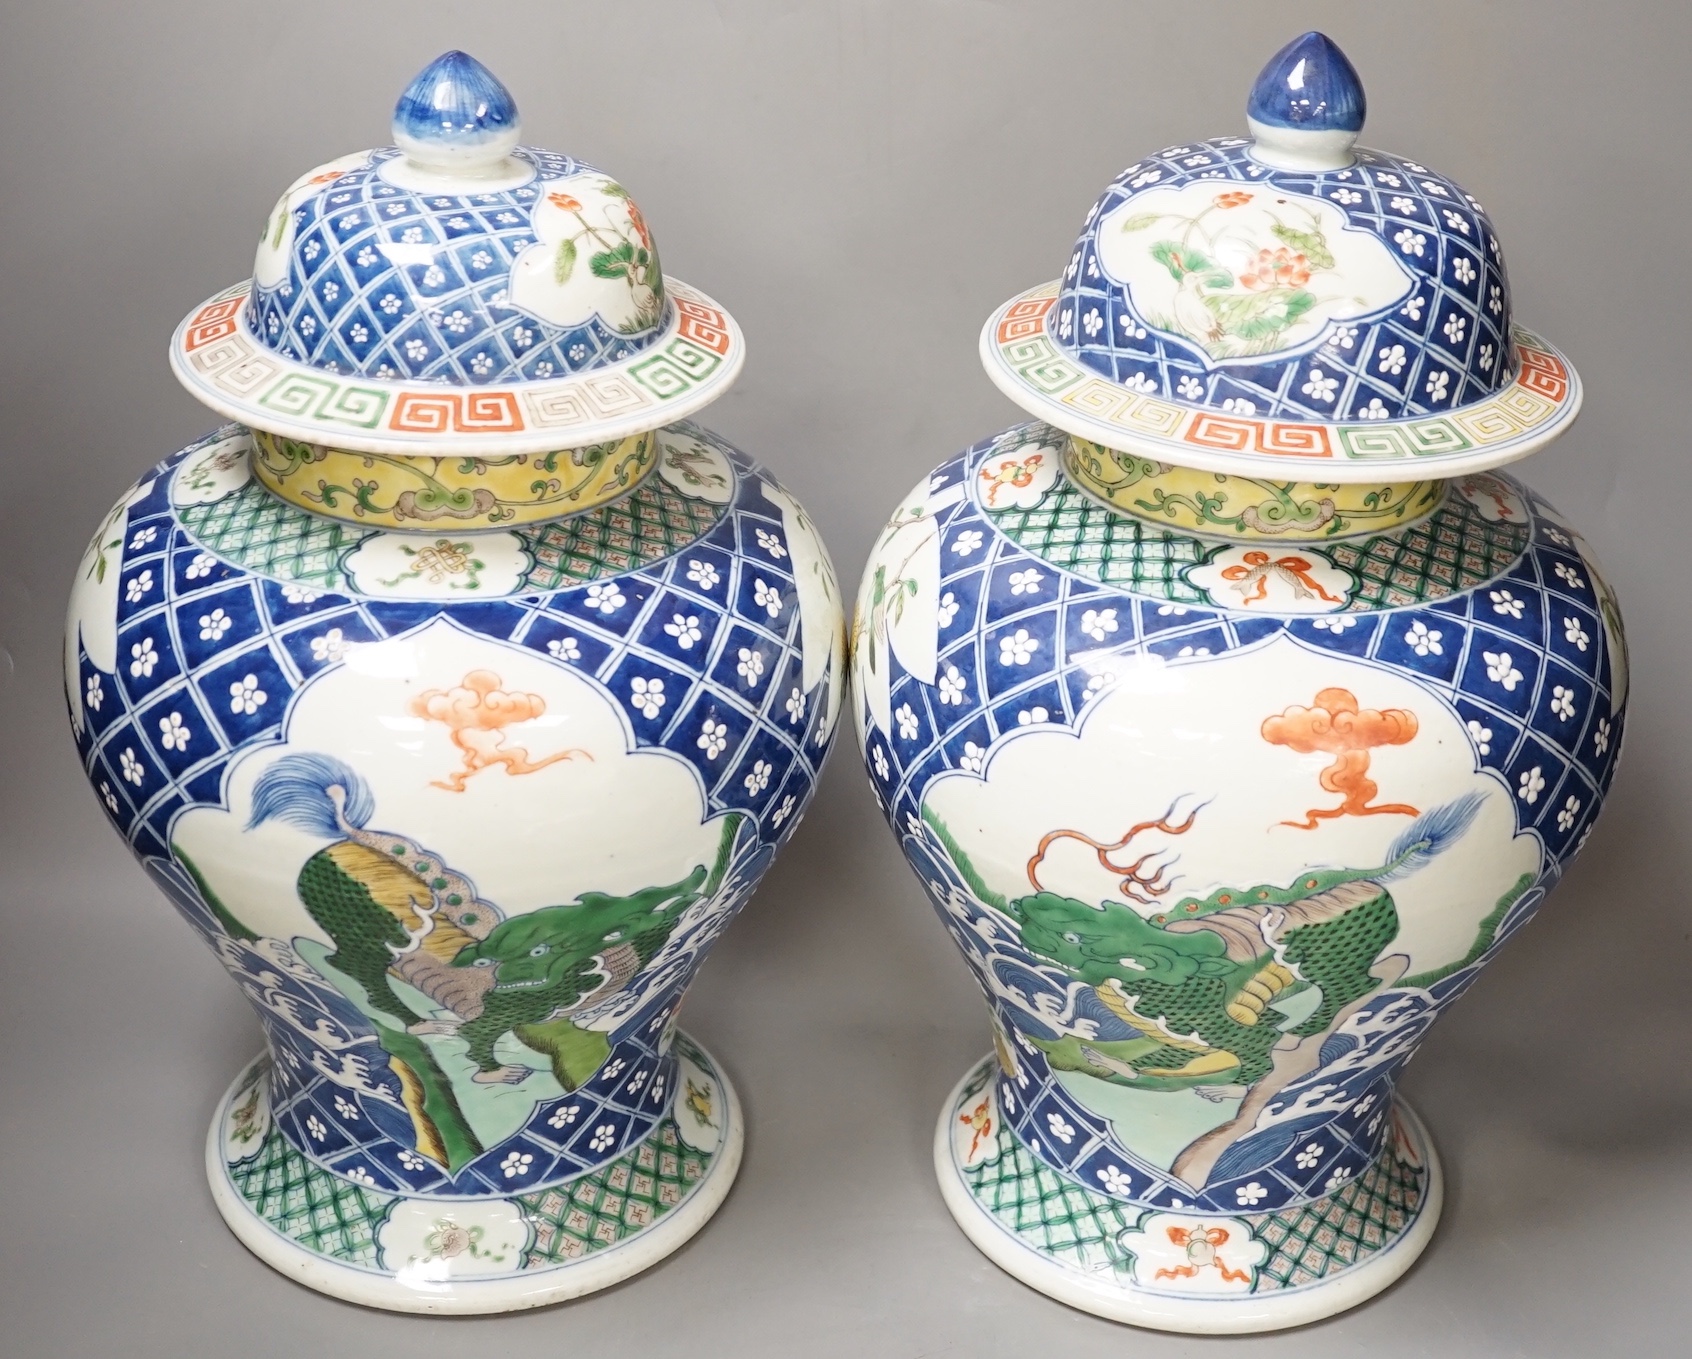 A pair of Chinese baluster jars and covers - 40cm high